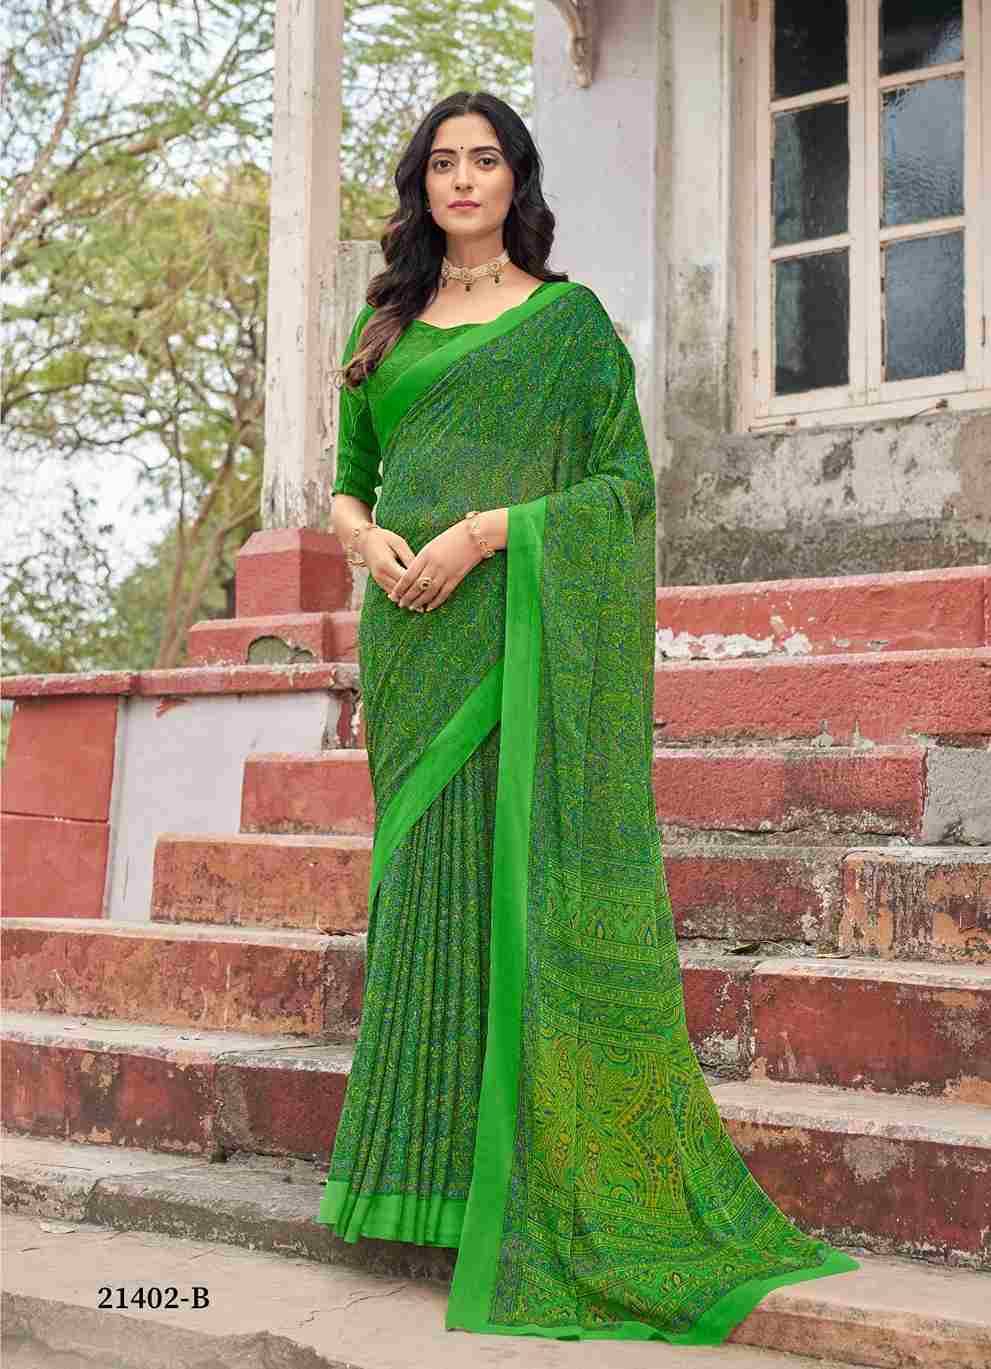 Star Chiffon Vol-95 By Ruchi Sarees 21401-A To 21403-D Series Indian Traditional Wear Collection Beautiful Stylish Fancy Colorful Party Wear & Occasional Wear Chiffon Sarees At Wholesale Price